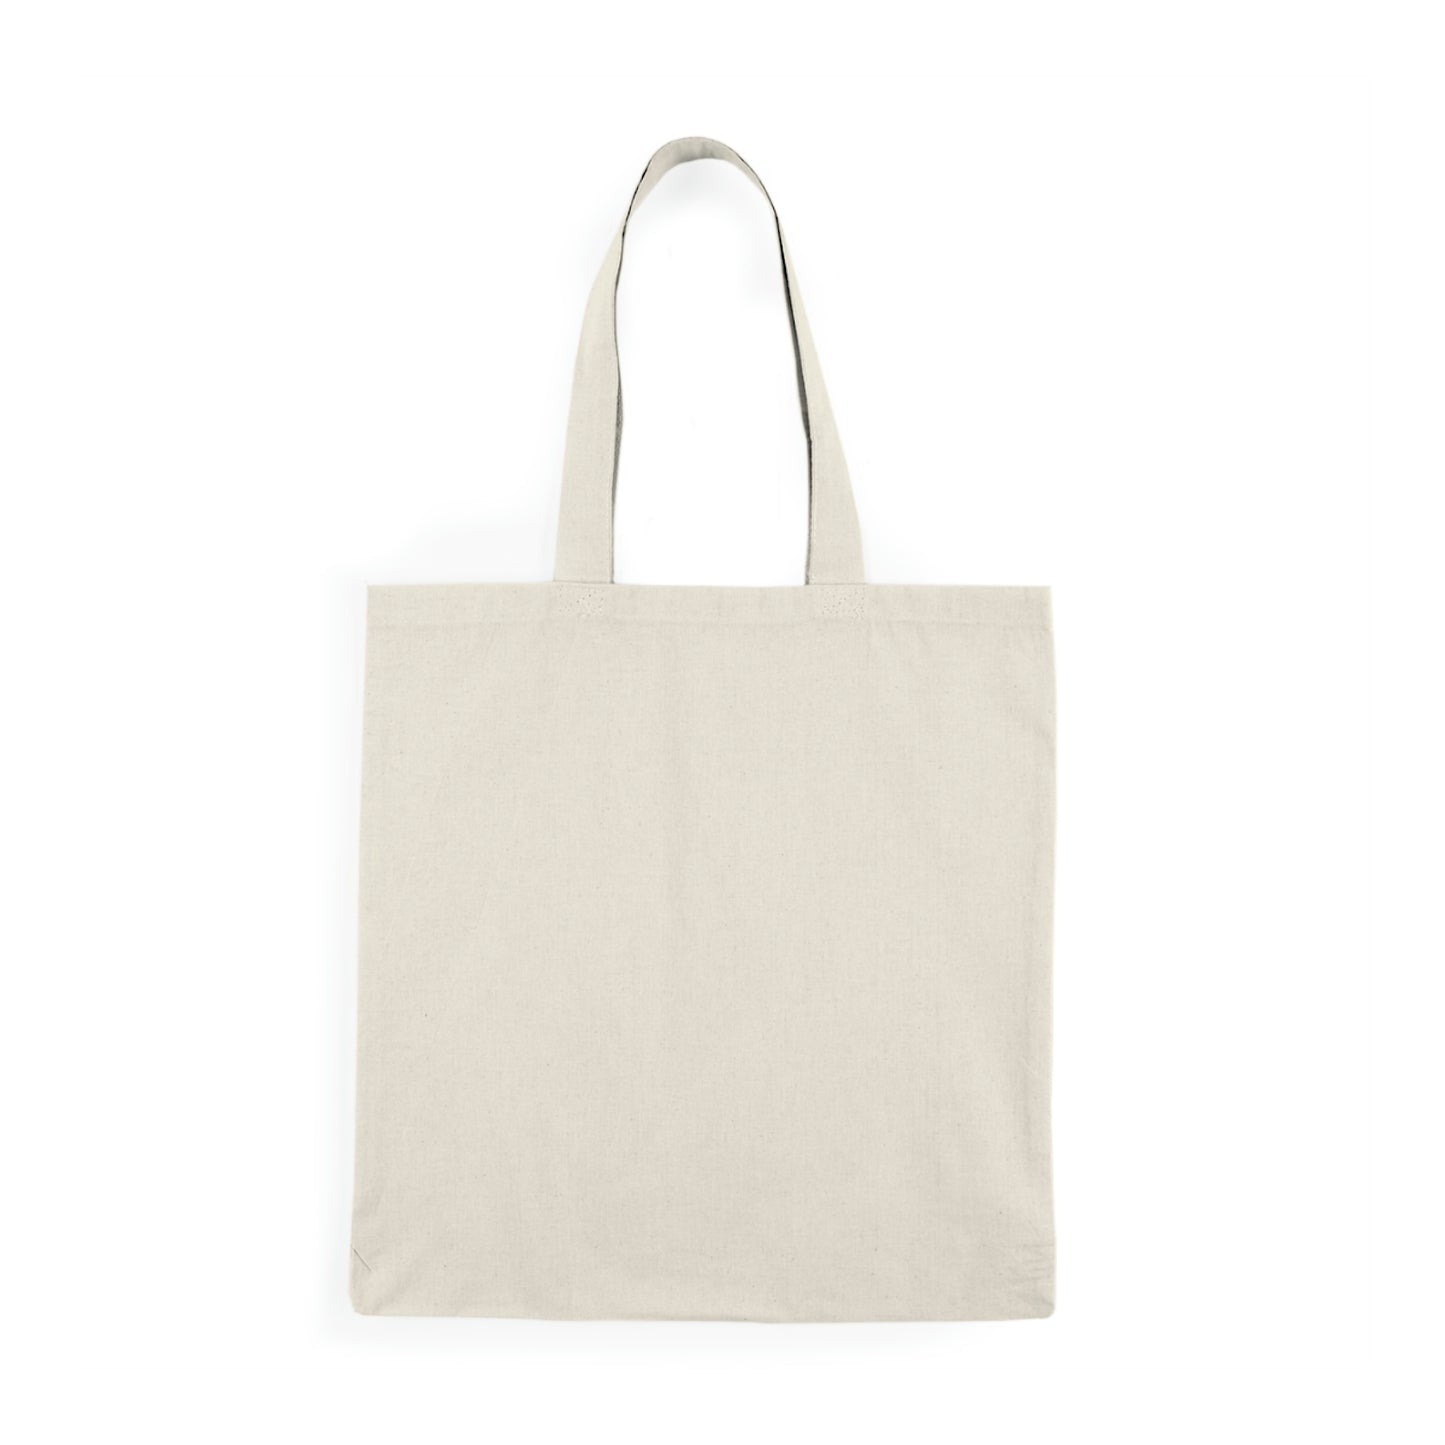 When the Time Comes to Light a Fire - Natural Tote Bag